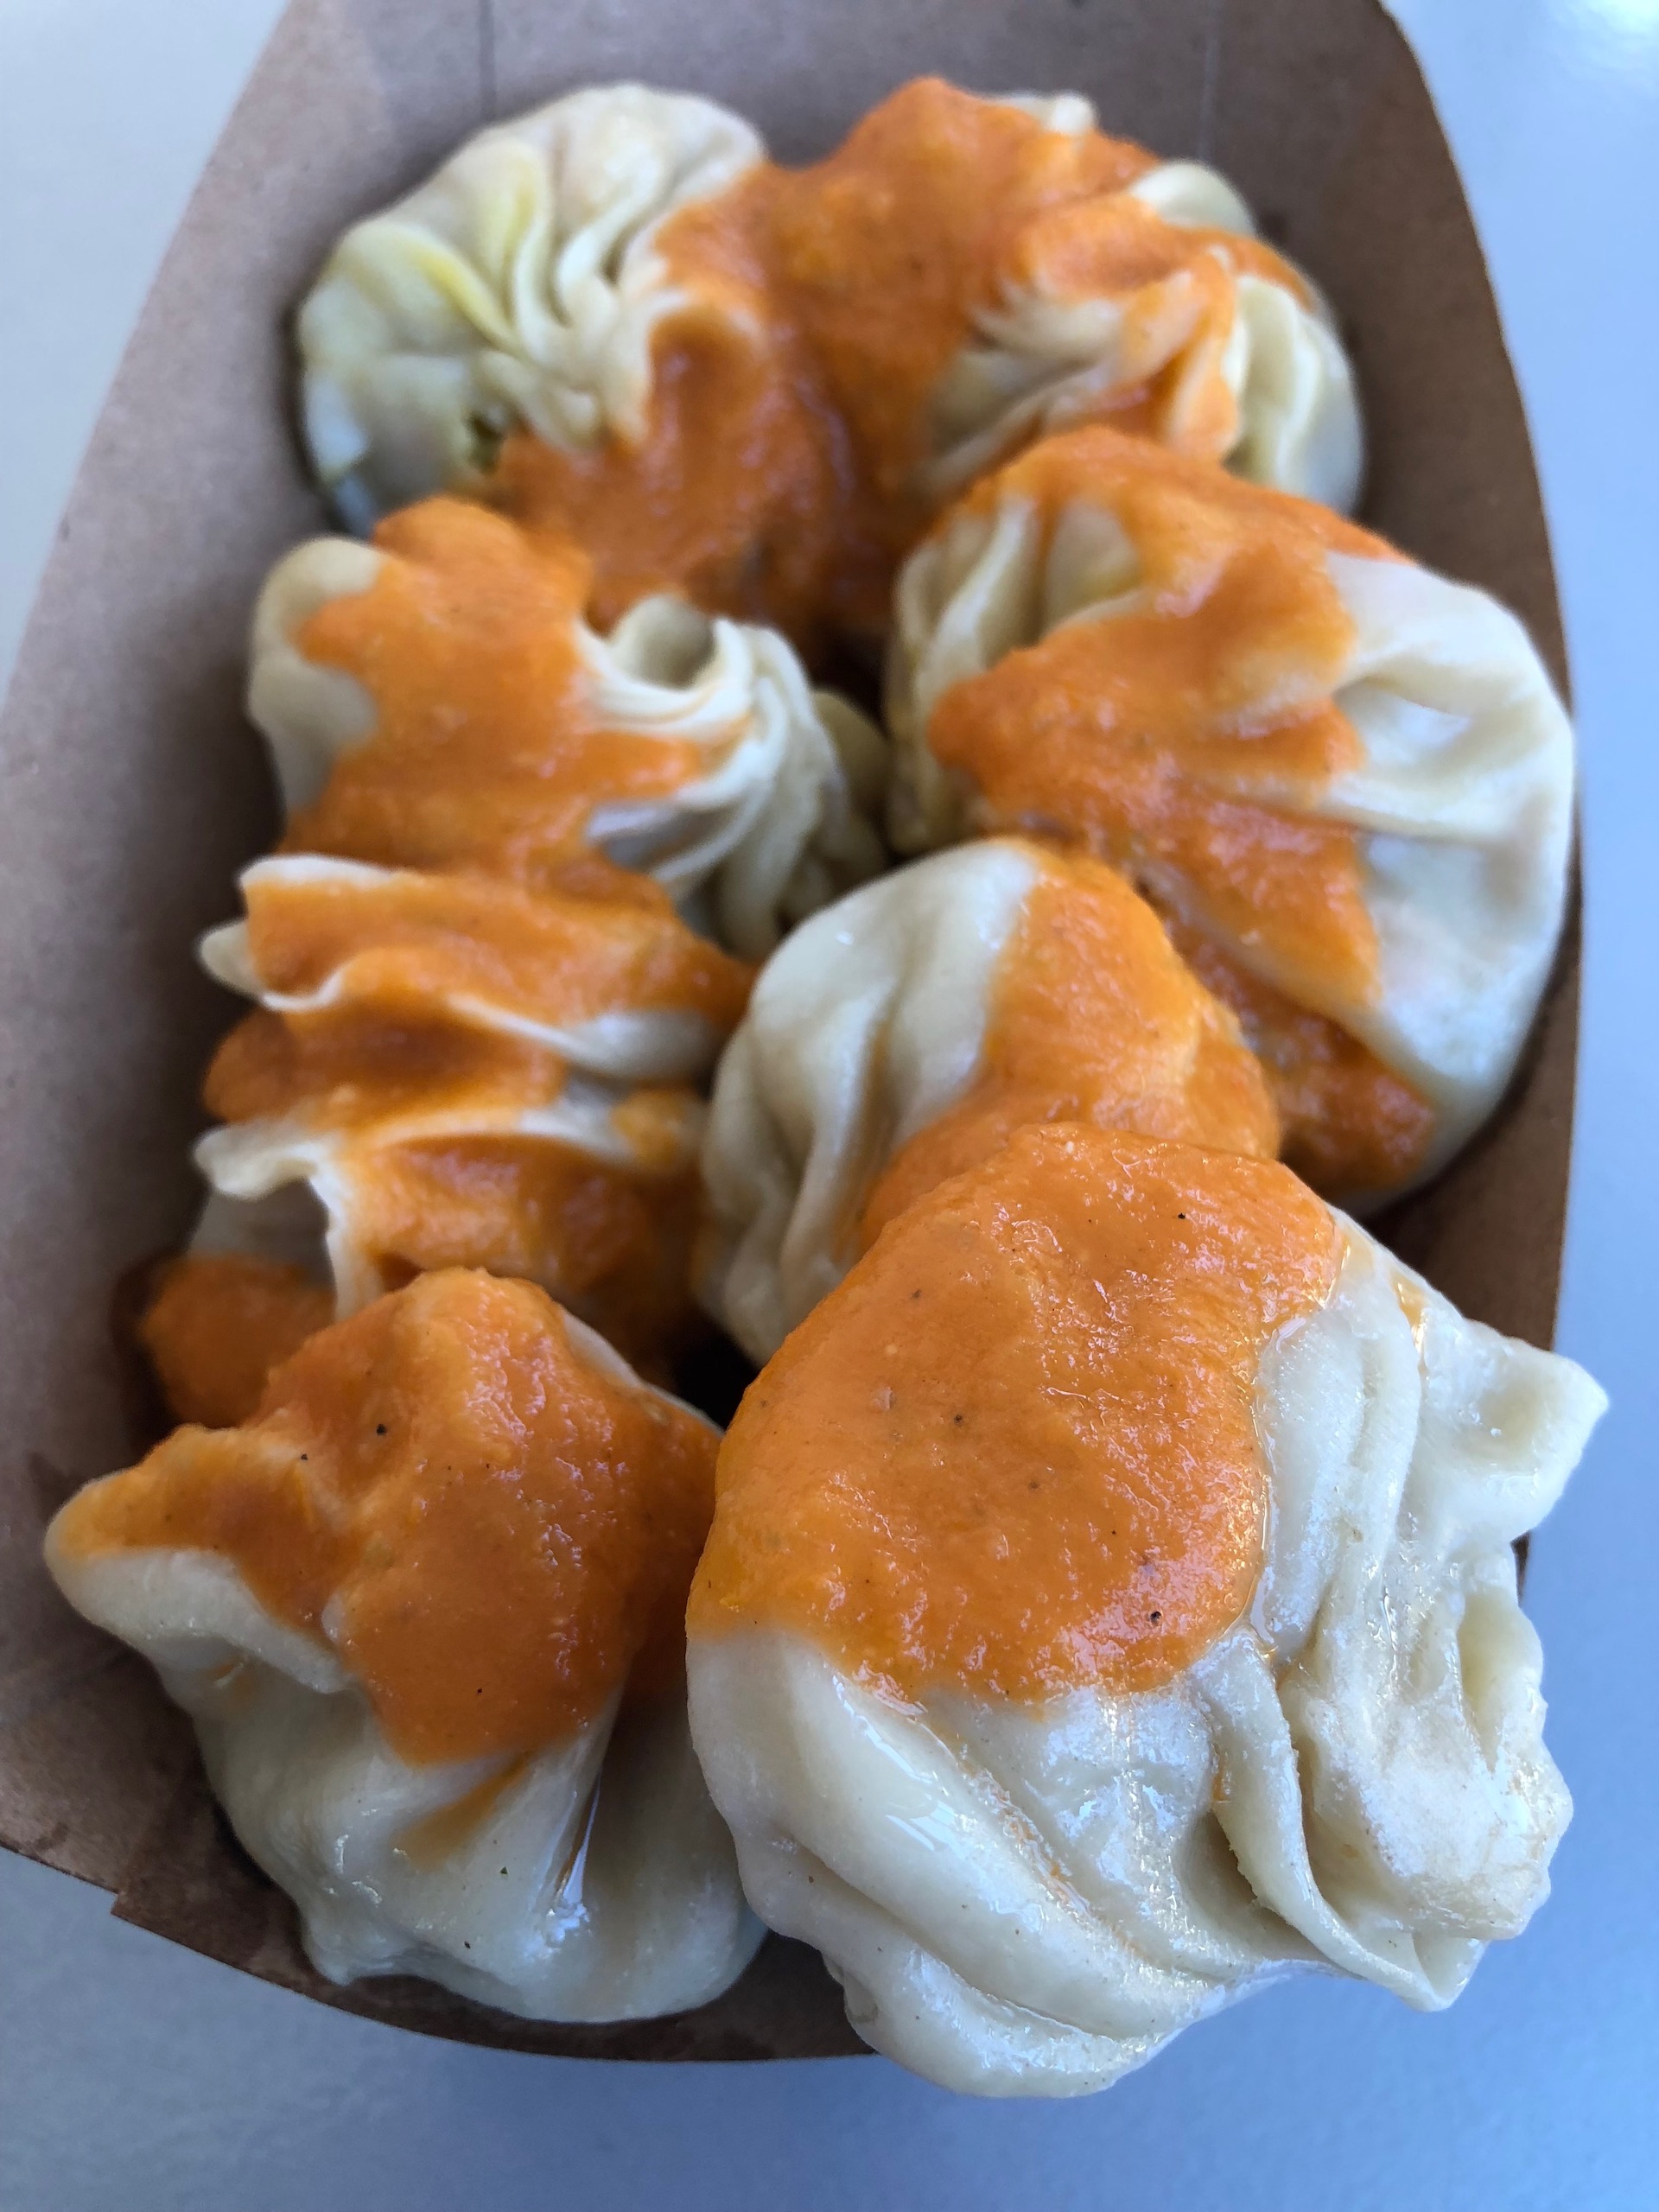 The turkey and vegetable momos at Bini’s Kitchen in SoMa